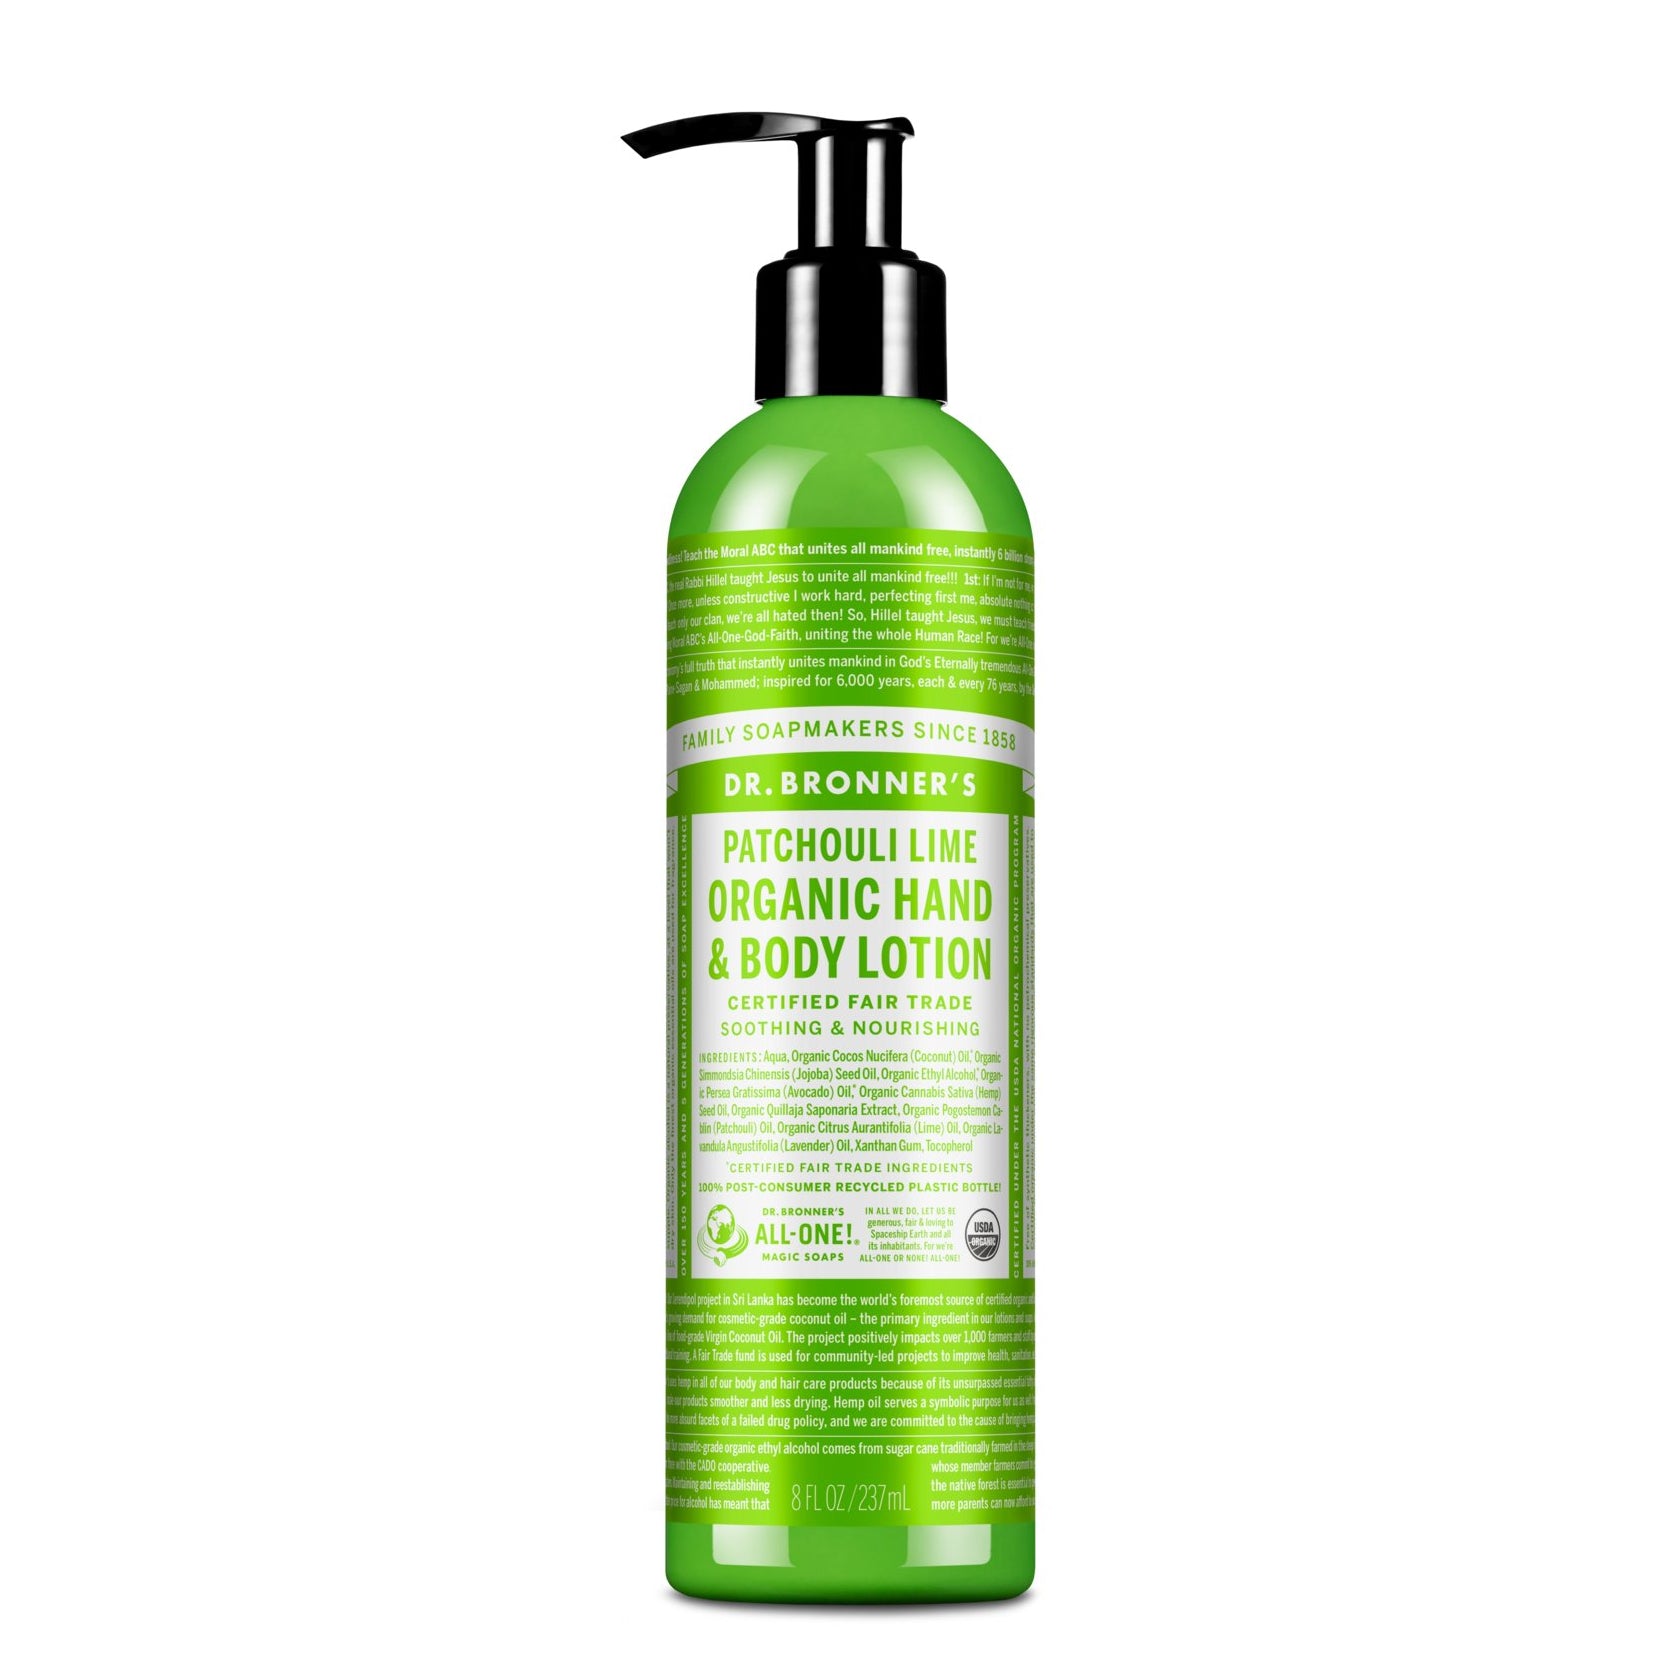 Dr. Bronner's Organic Hand & Body Lotion - Patchouli Lime